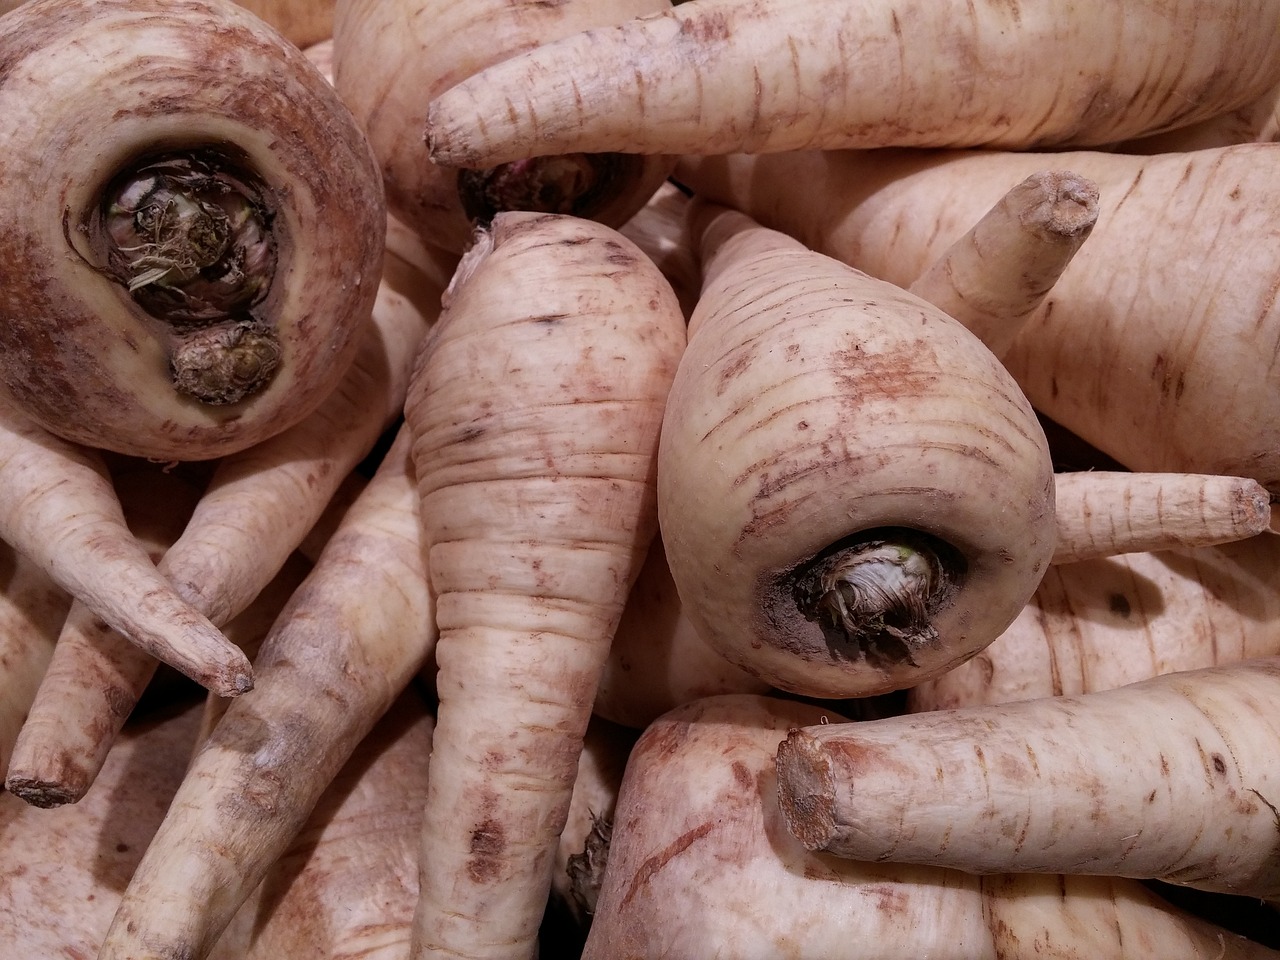 parsnips root vegetables free photo